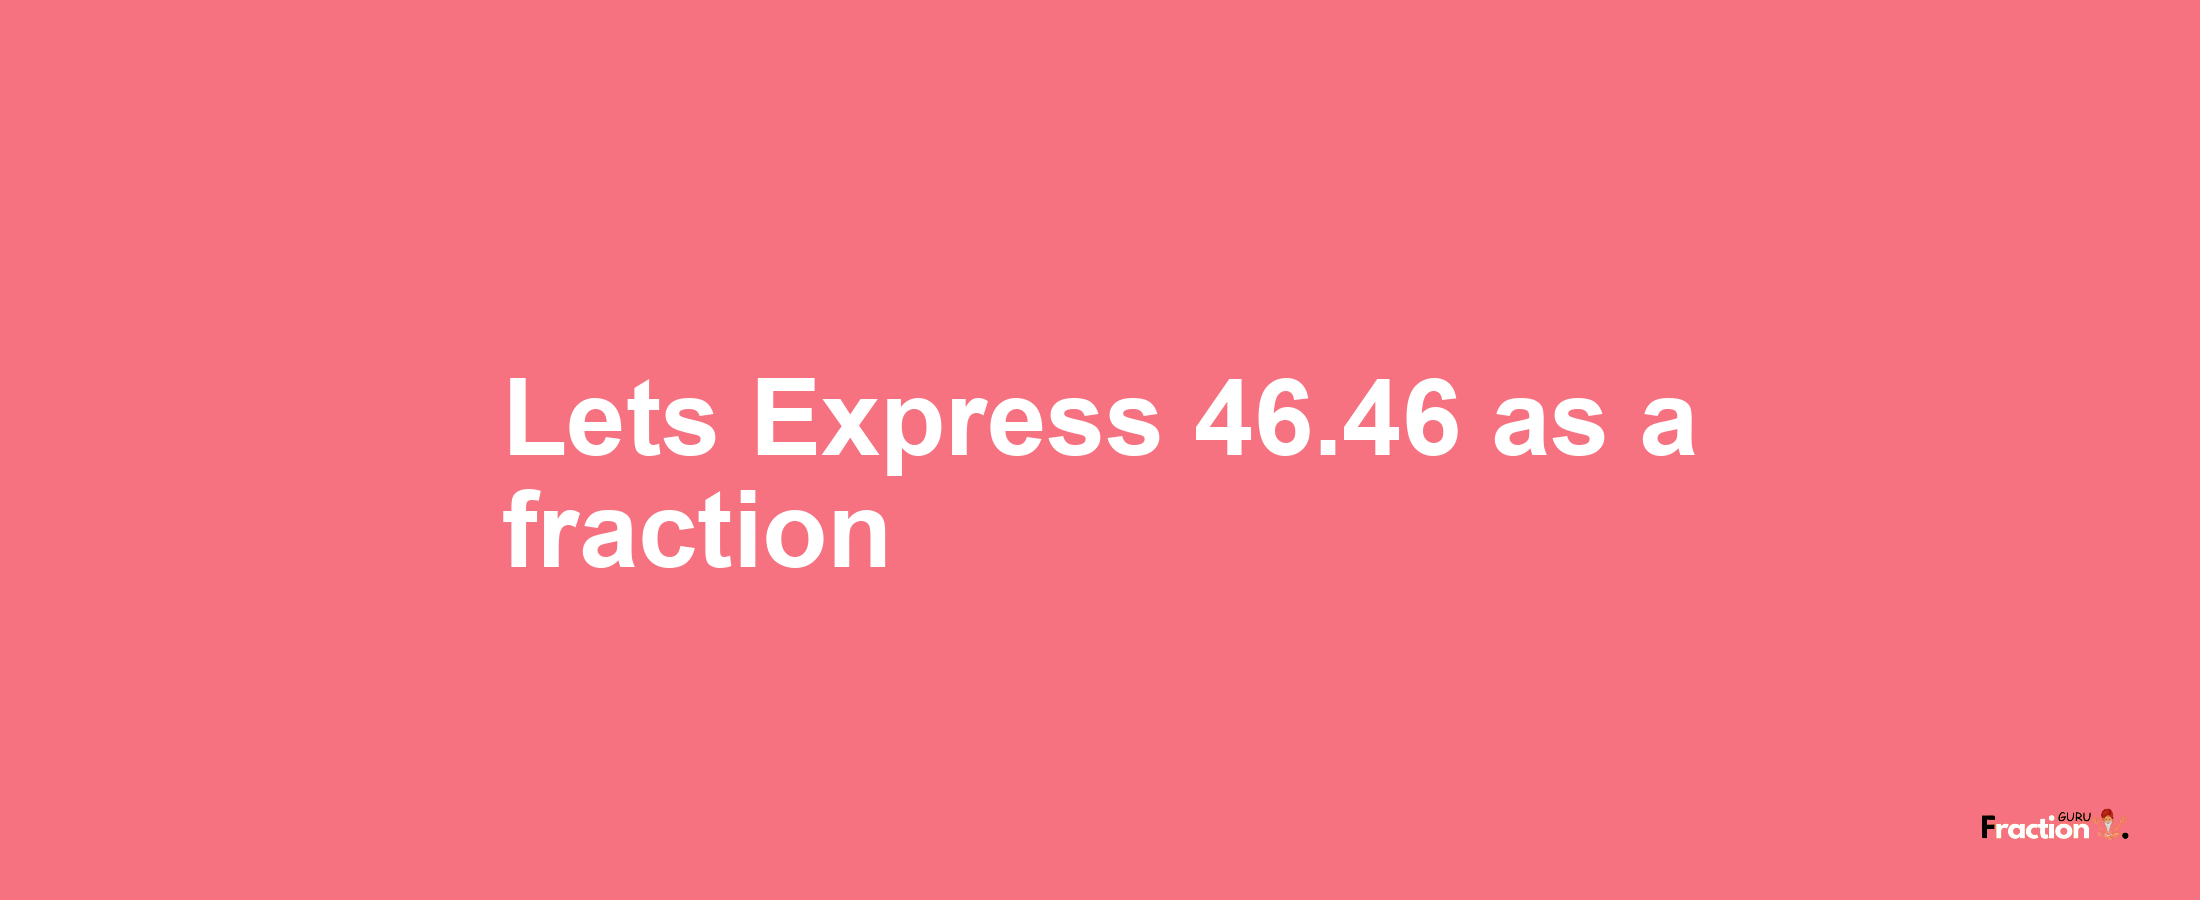 Lets Express 46.46 as afraction